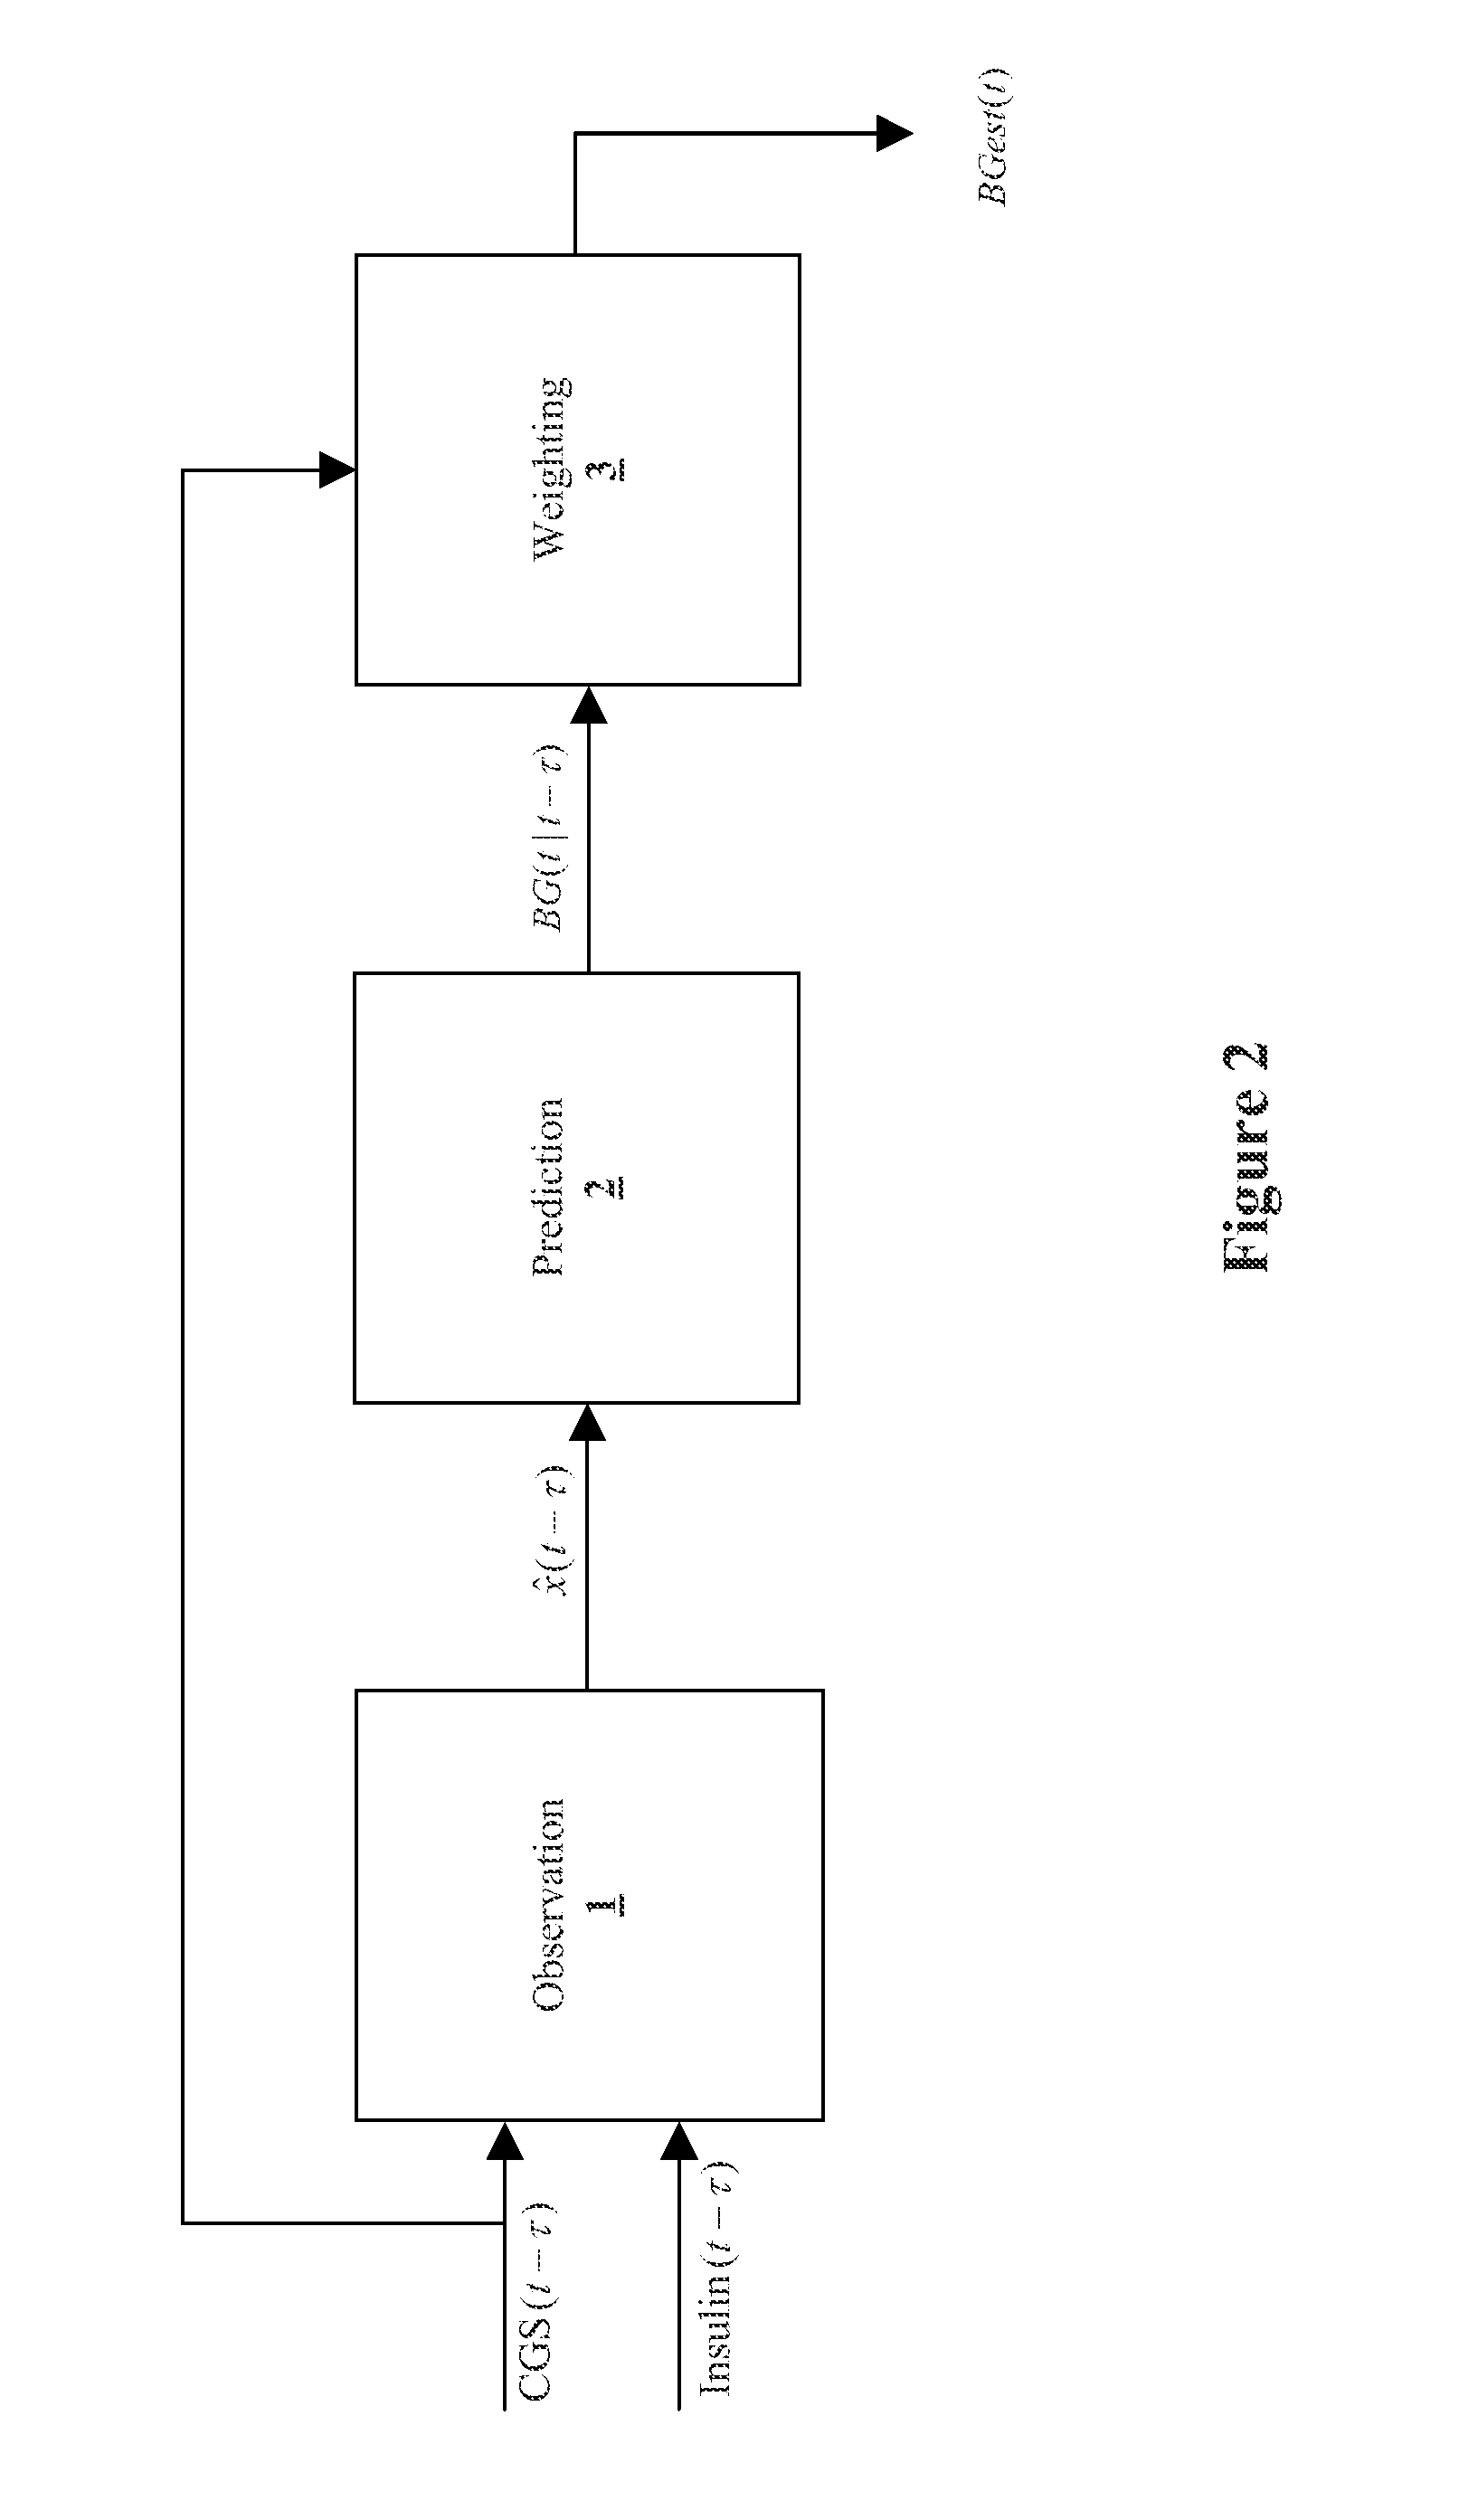 Method, system, and computer program product for improving the accuracy of glucose sensors using insulin delivery observation in diabetes